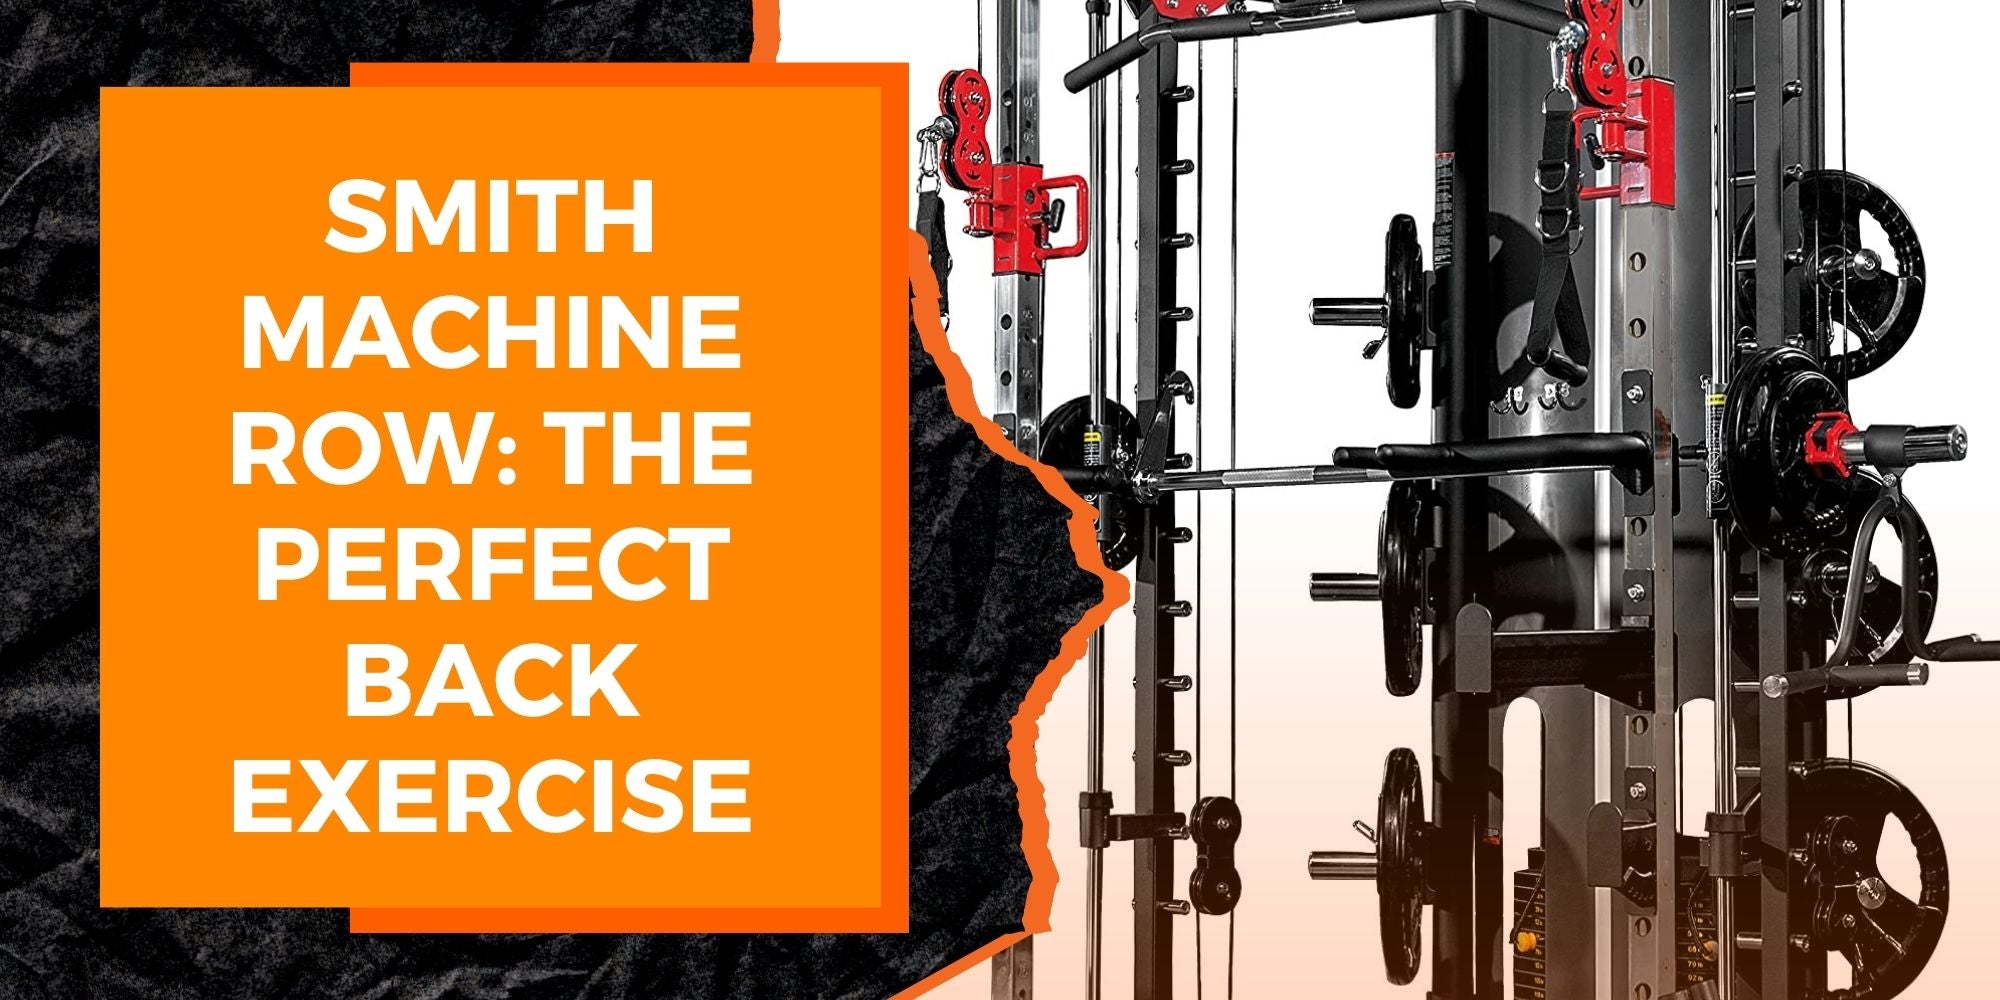 Smith Machine Row: The Perfect Back Exercise